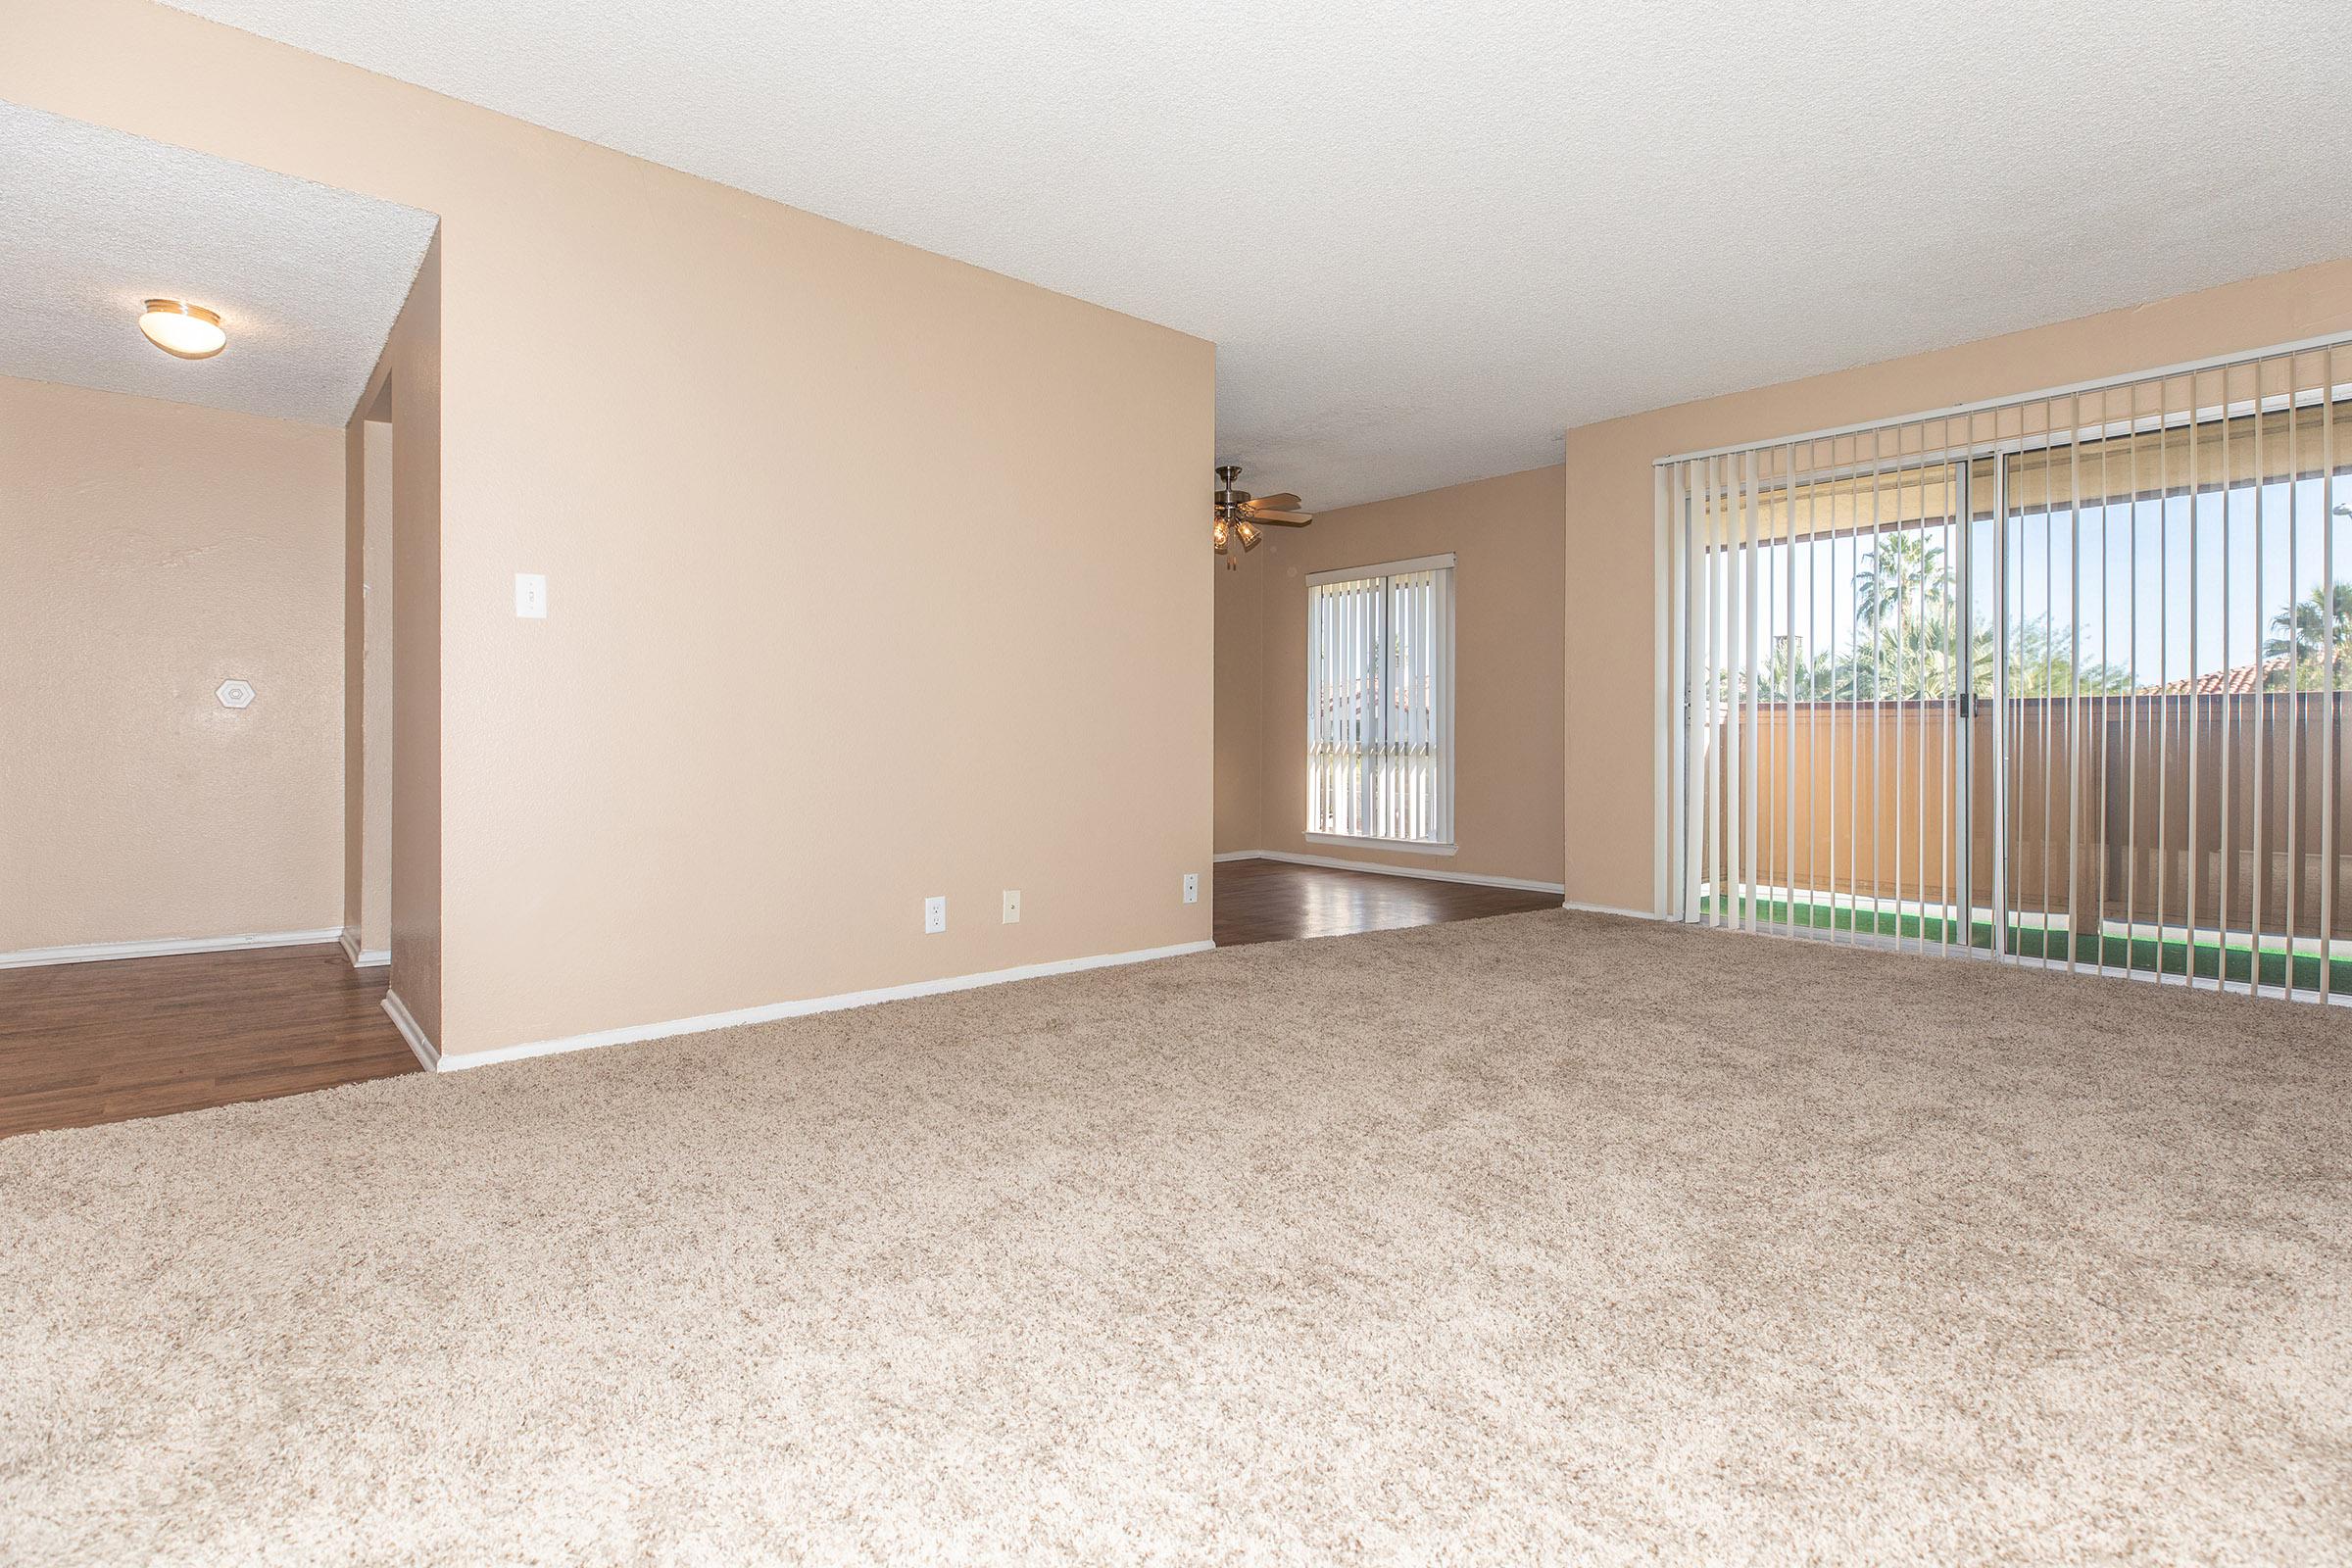 Vacant apartment with open window blinds